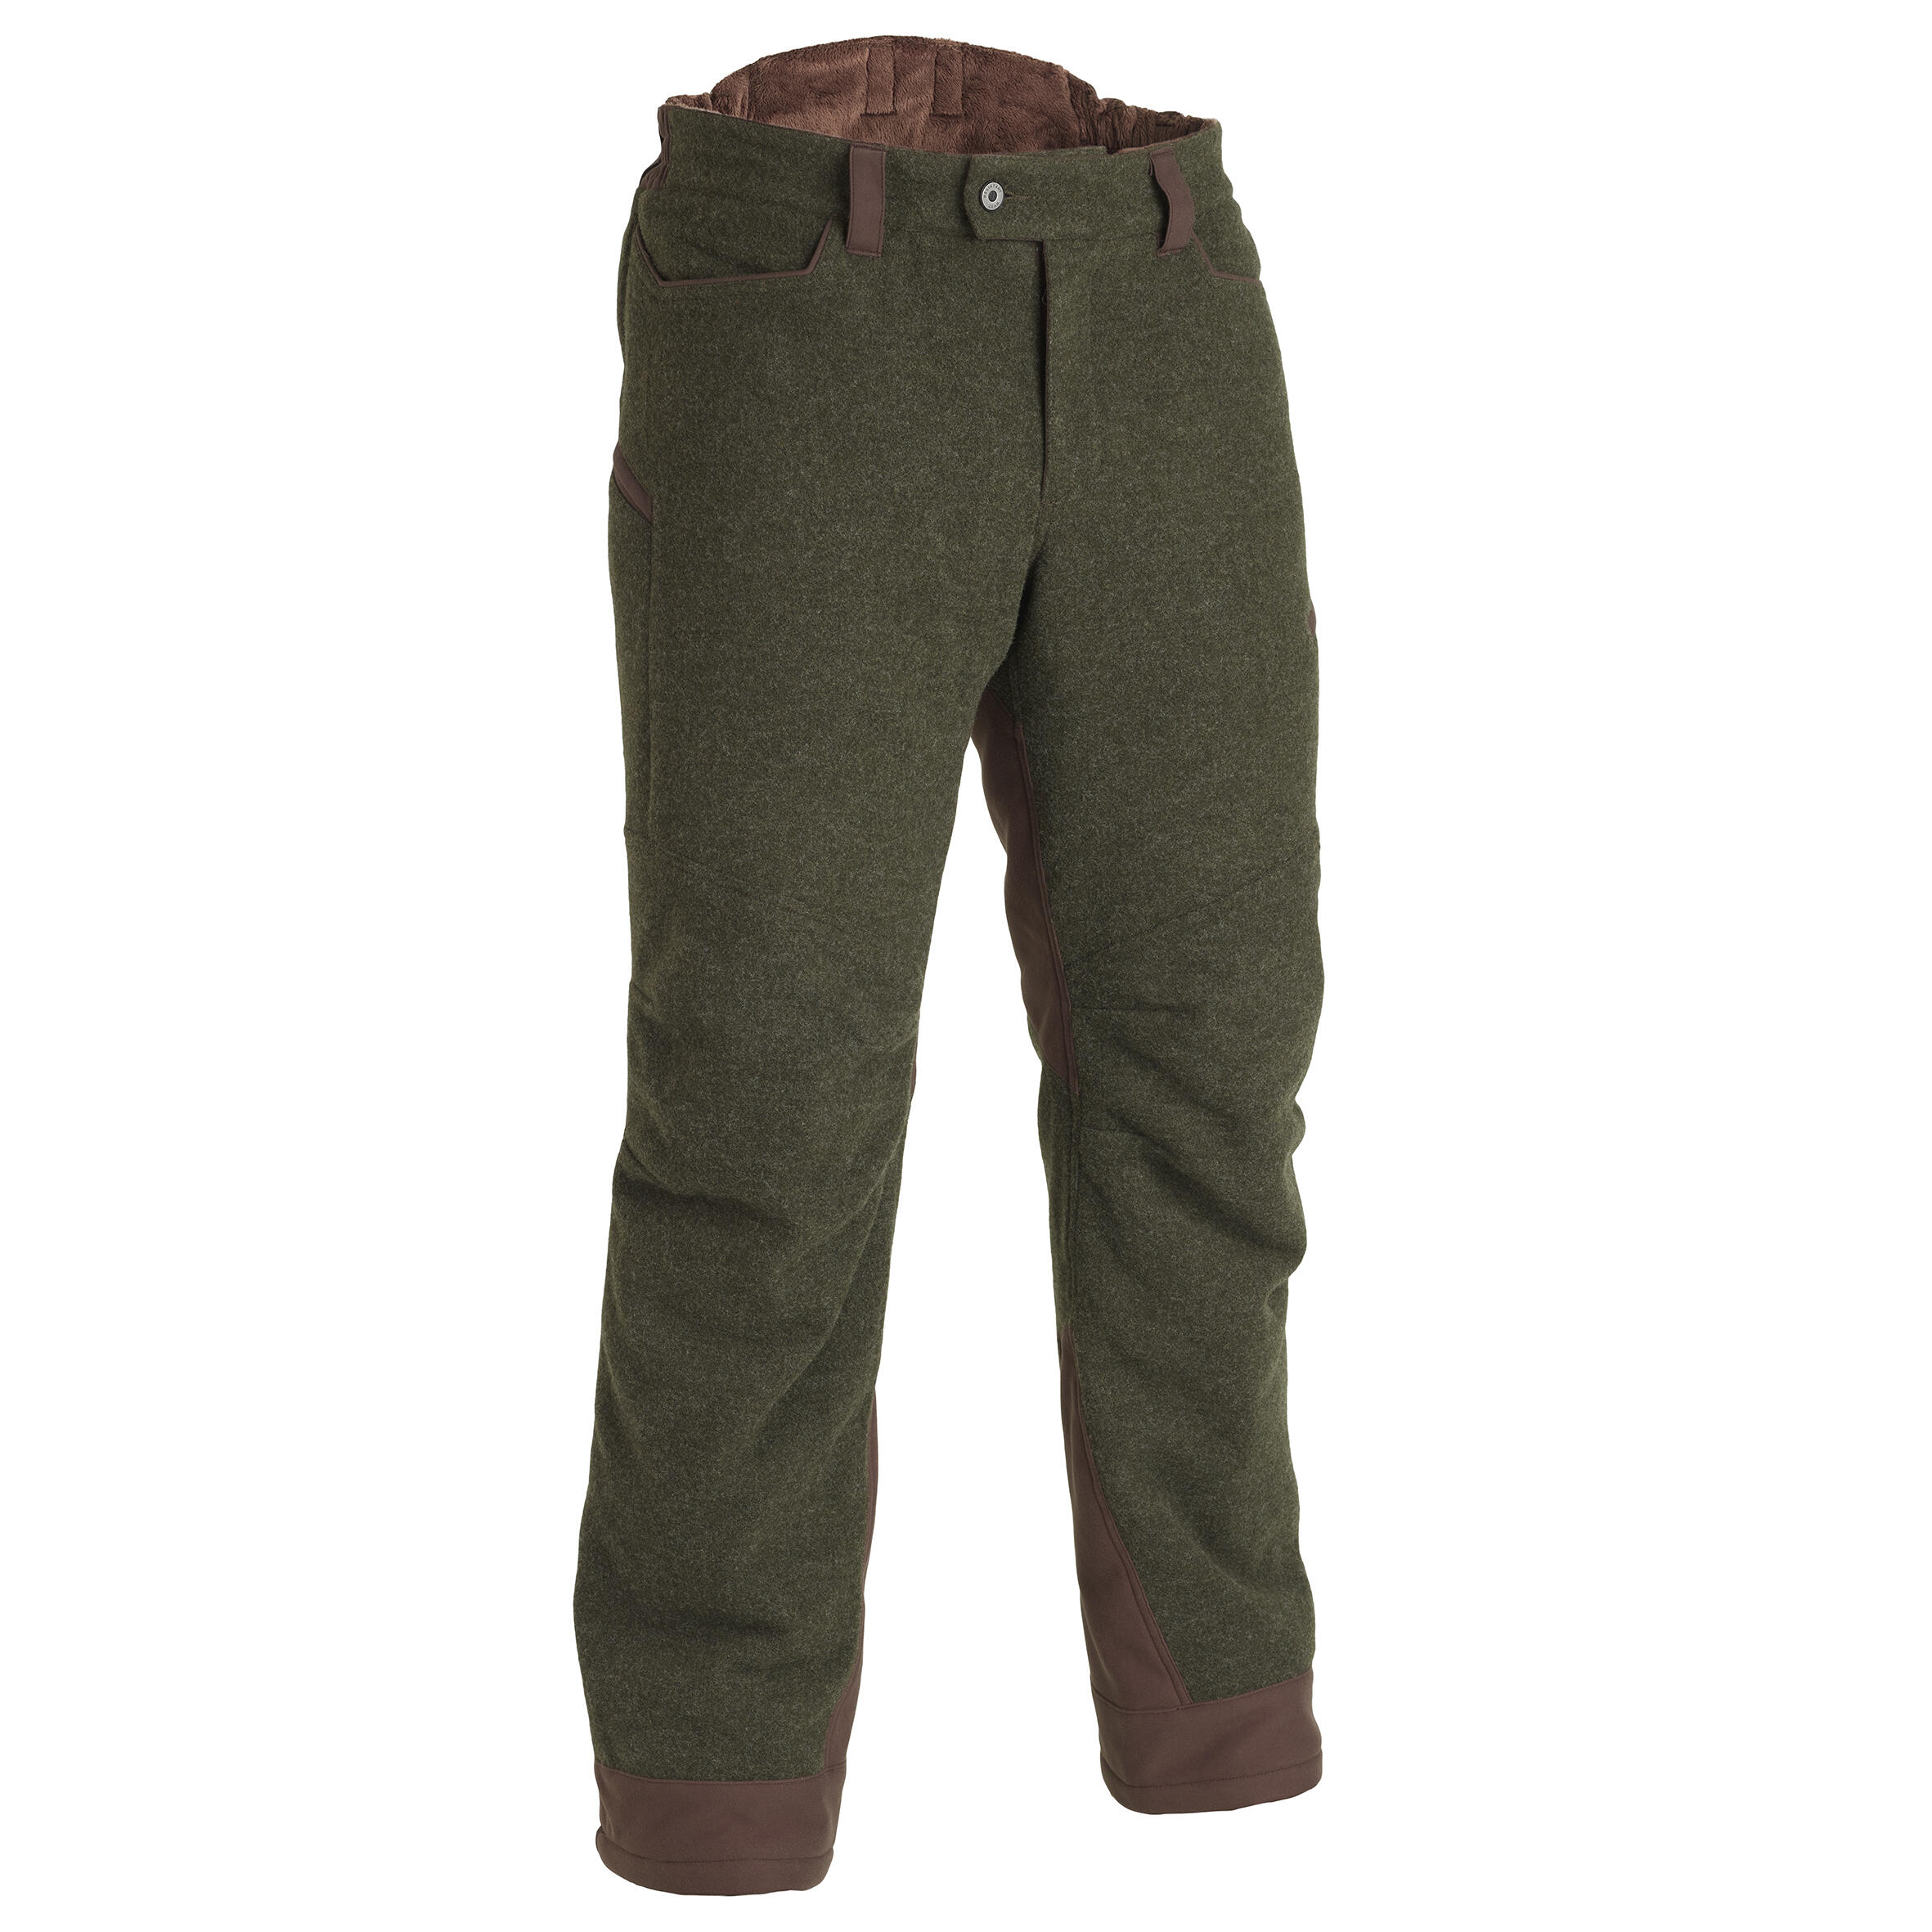 SOLOGNAC HUNTING WARM SILENT WOOL TROUSERS 900 - GREEN